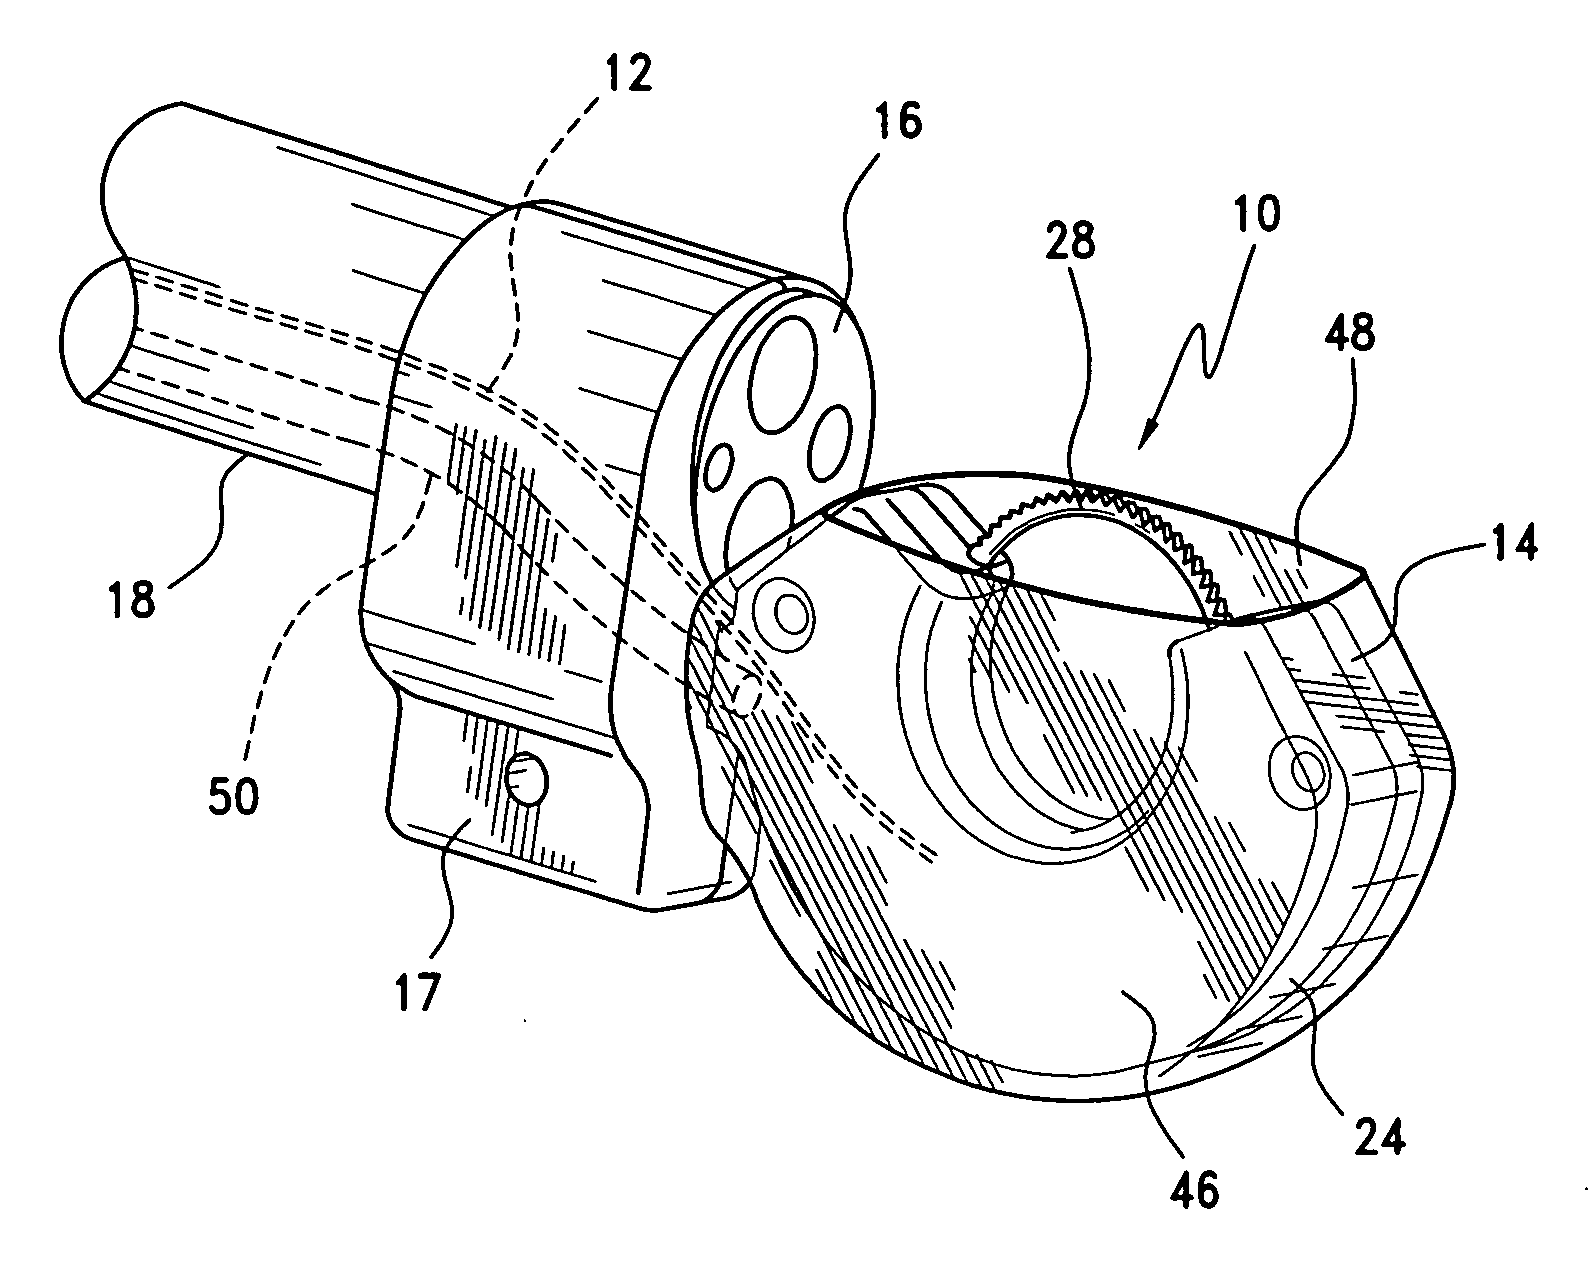 Surgical suturing apparatus with anti-backup system